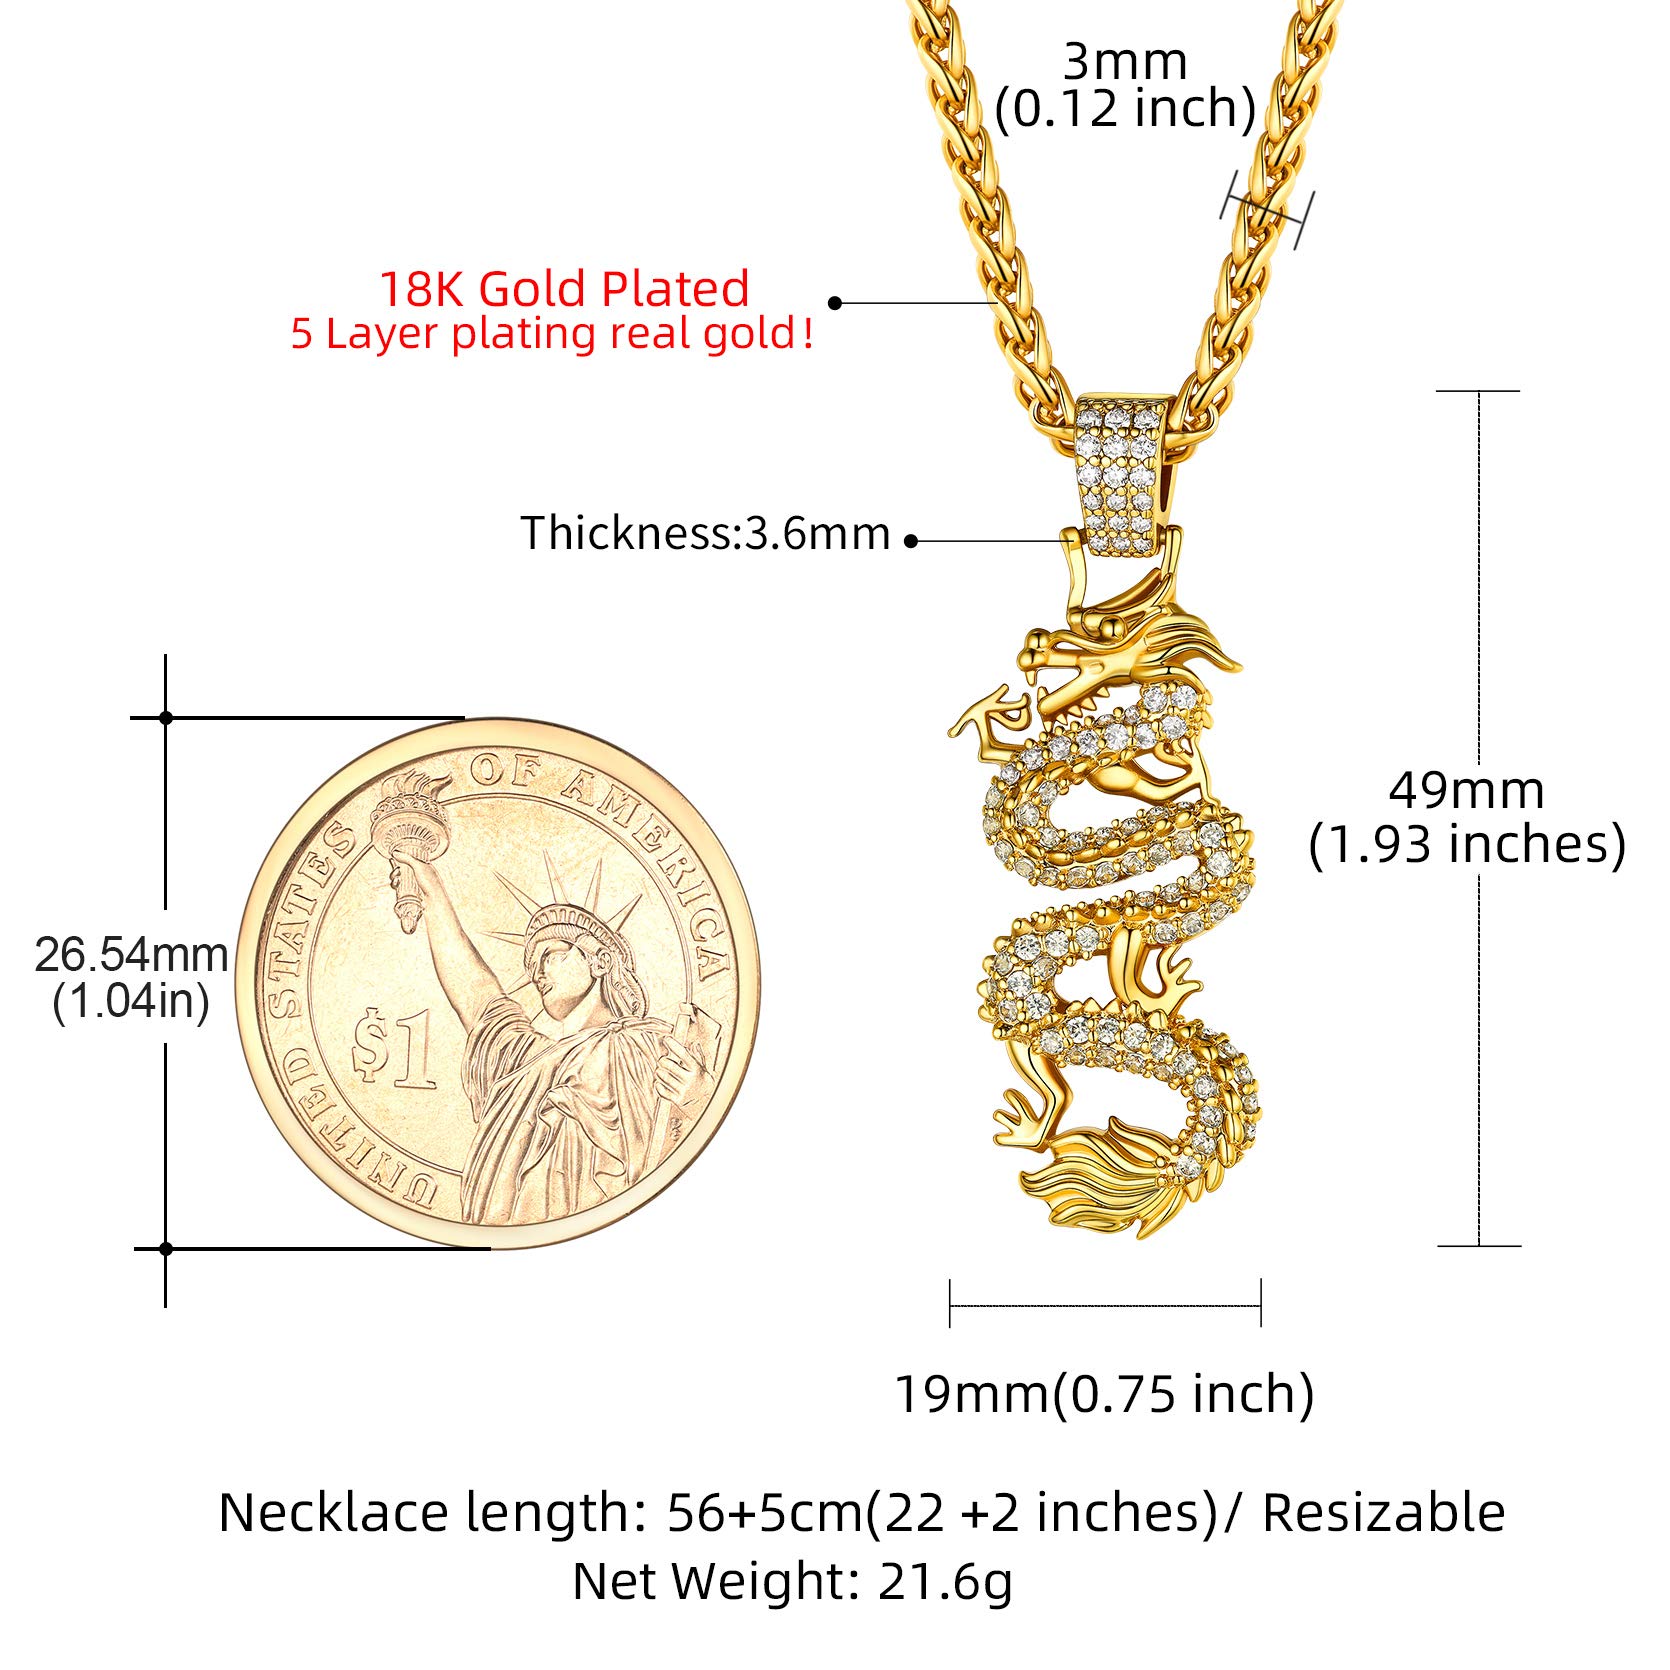 GoldChic Jewelry Gold Dragon Buddha Necklace for Men Women, Chinese Religion Lucky Amulet Jade Pendent Protection Fengshui Jewelry